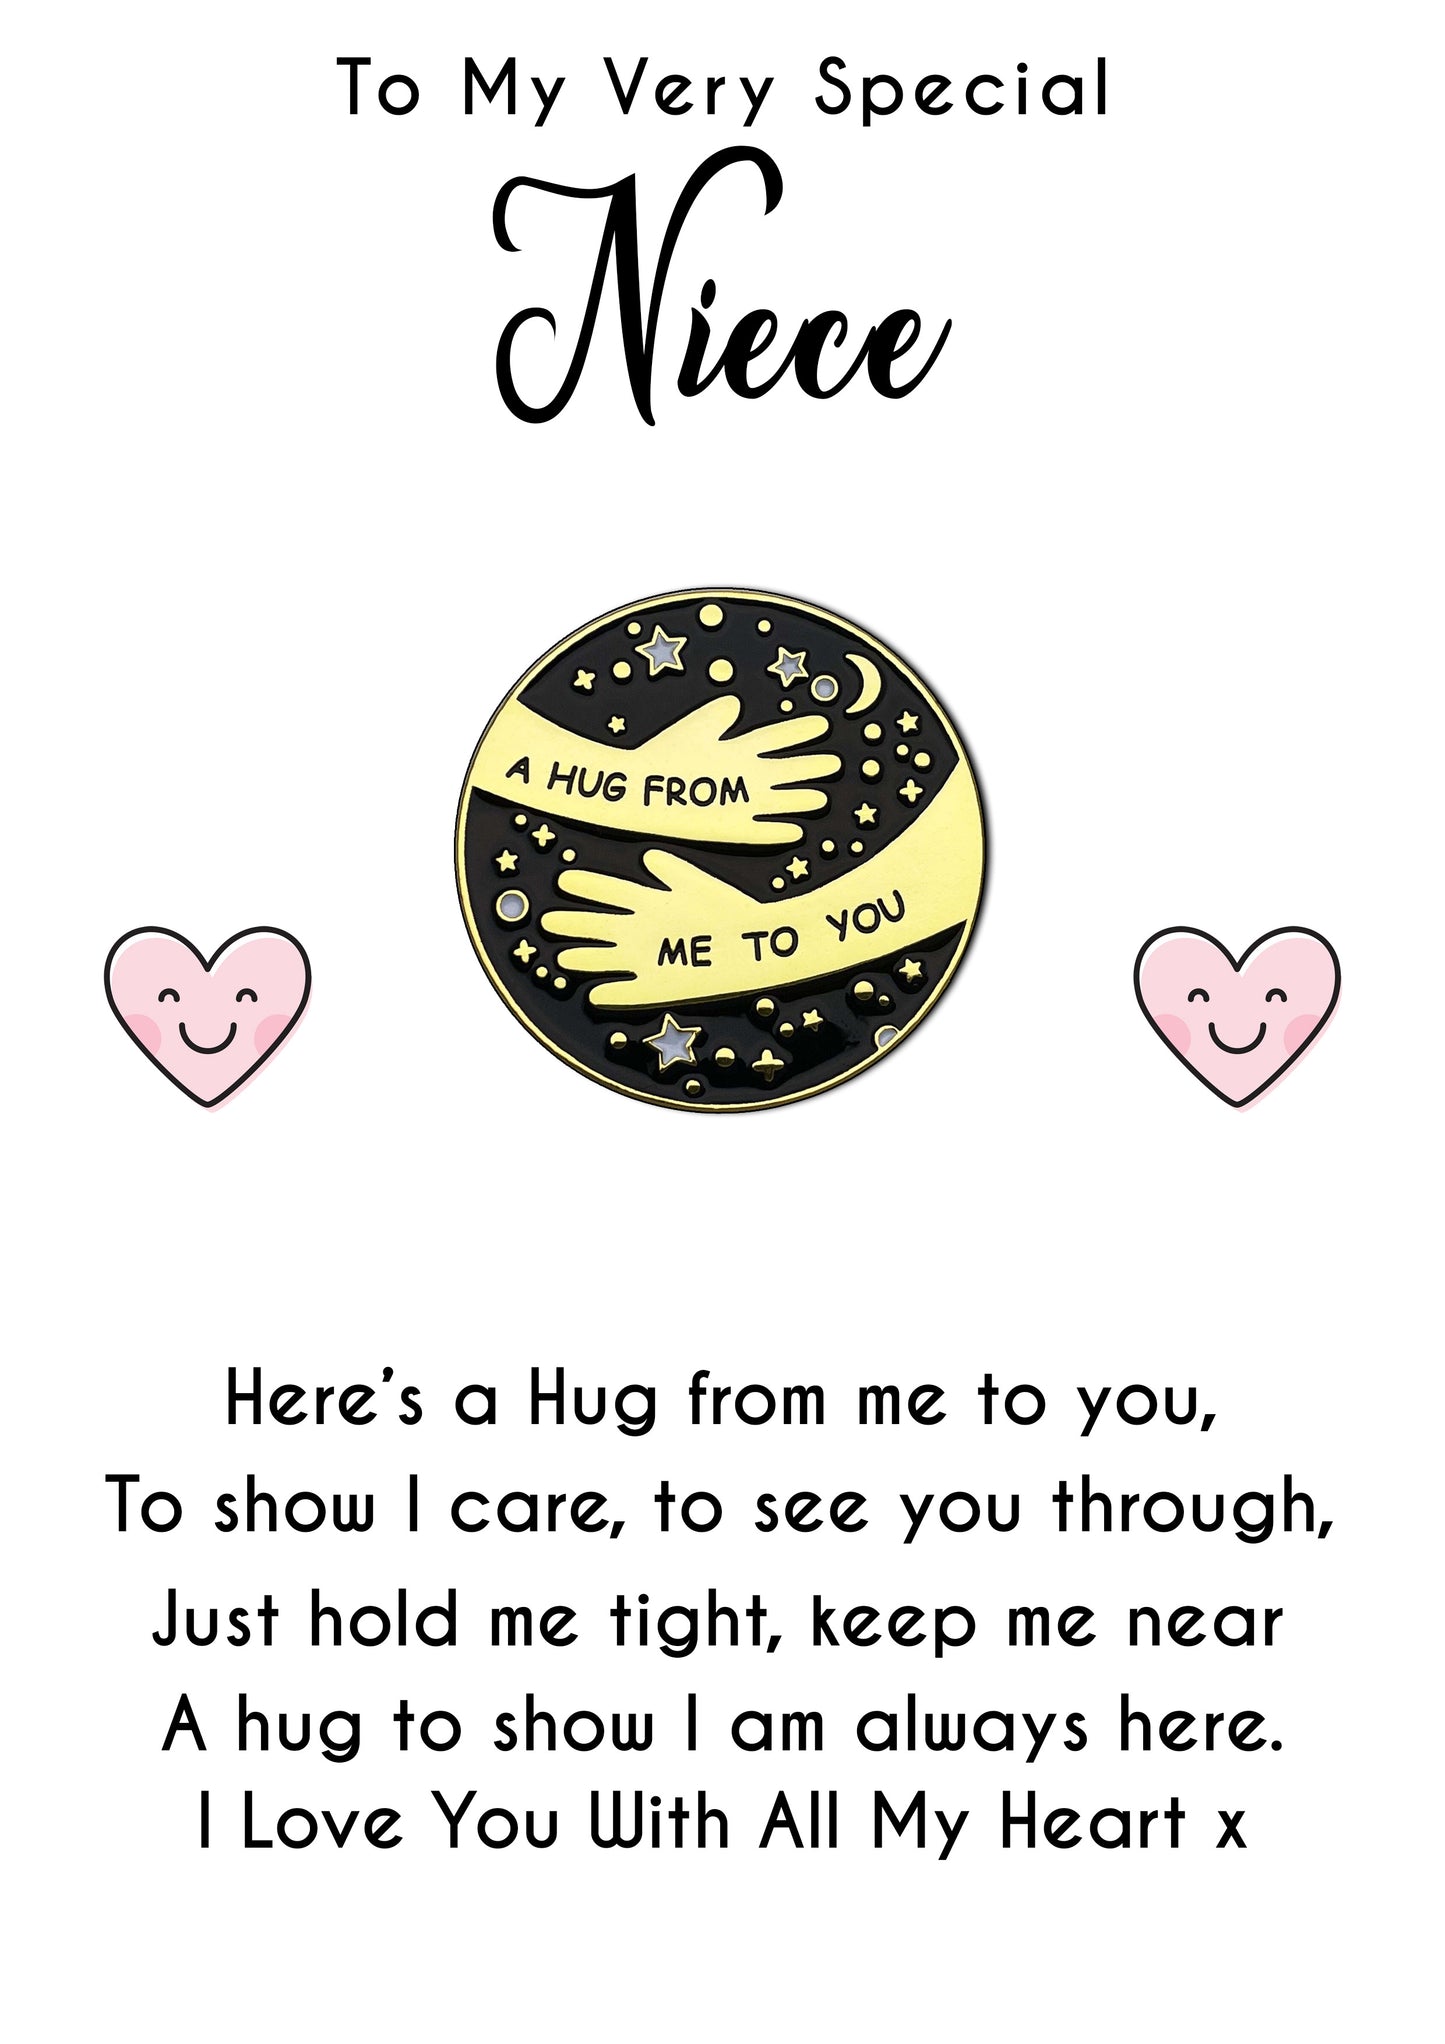 Pocket Hug Pin Badges With Very Special Niece Heart Message Cards